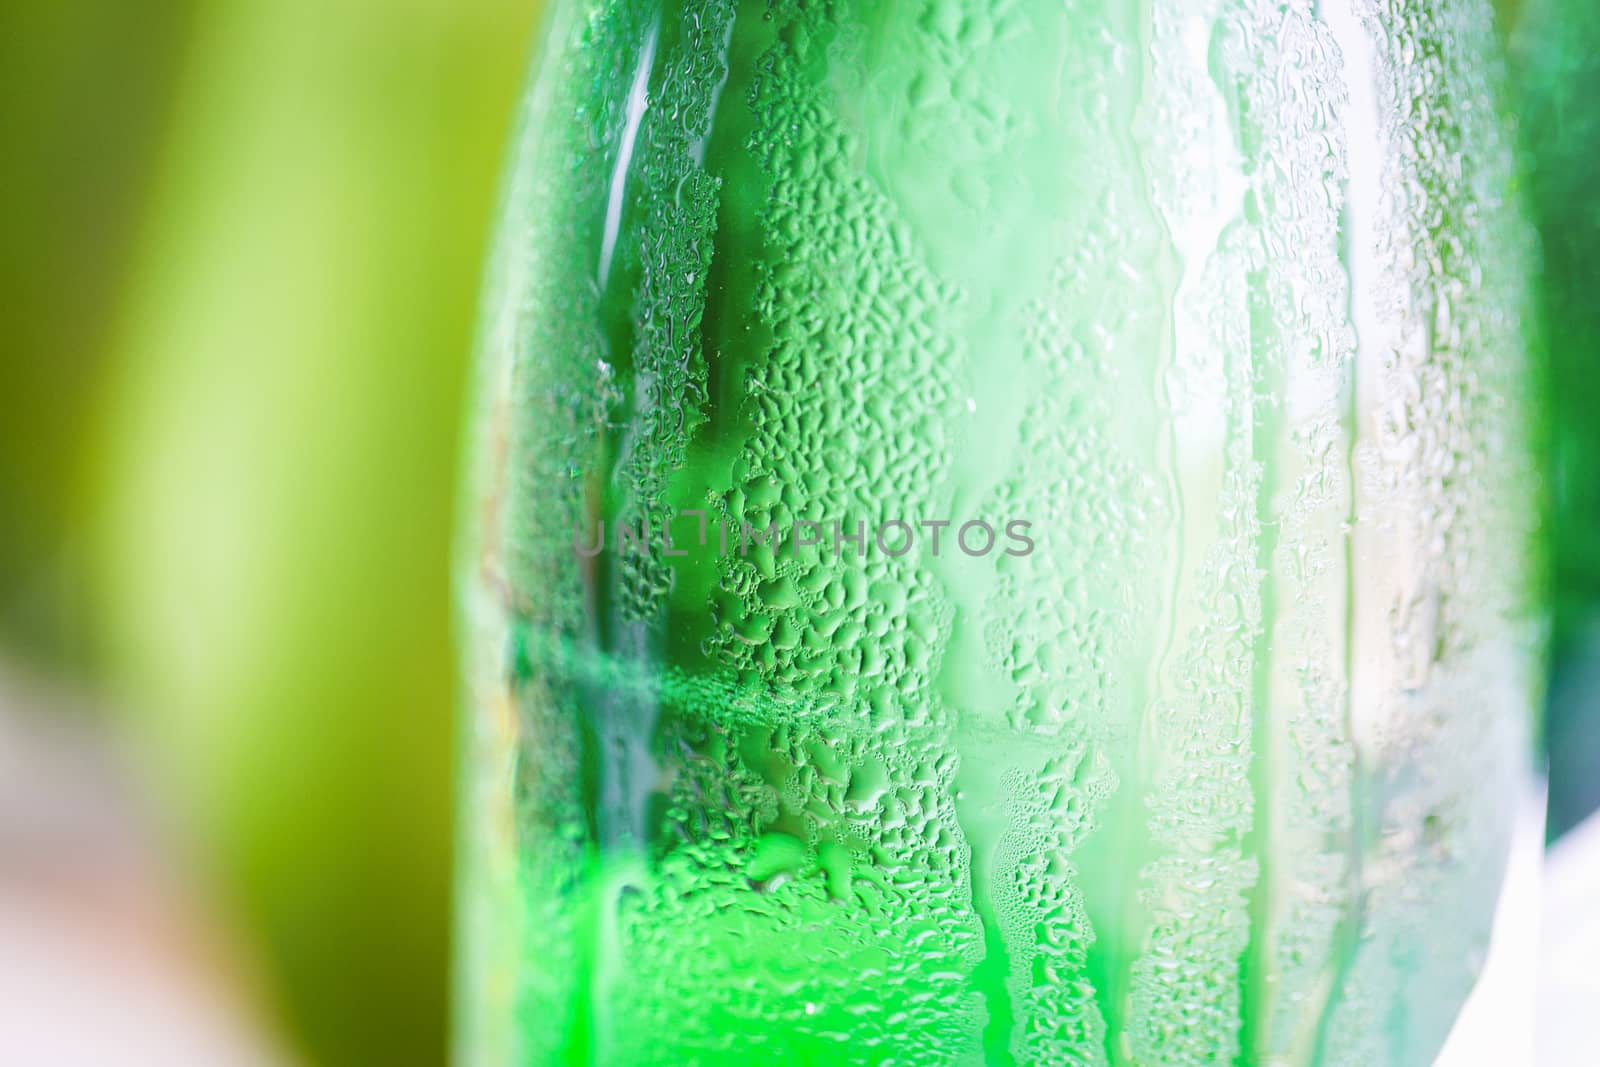 Green glass bottle with condensation on it